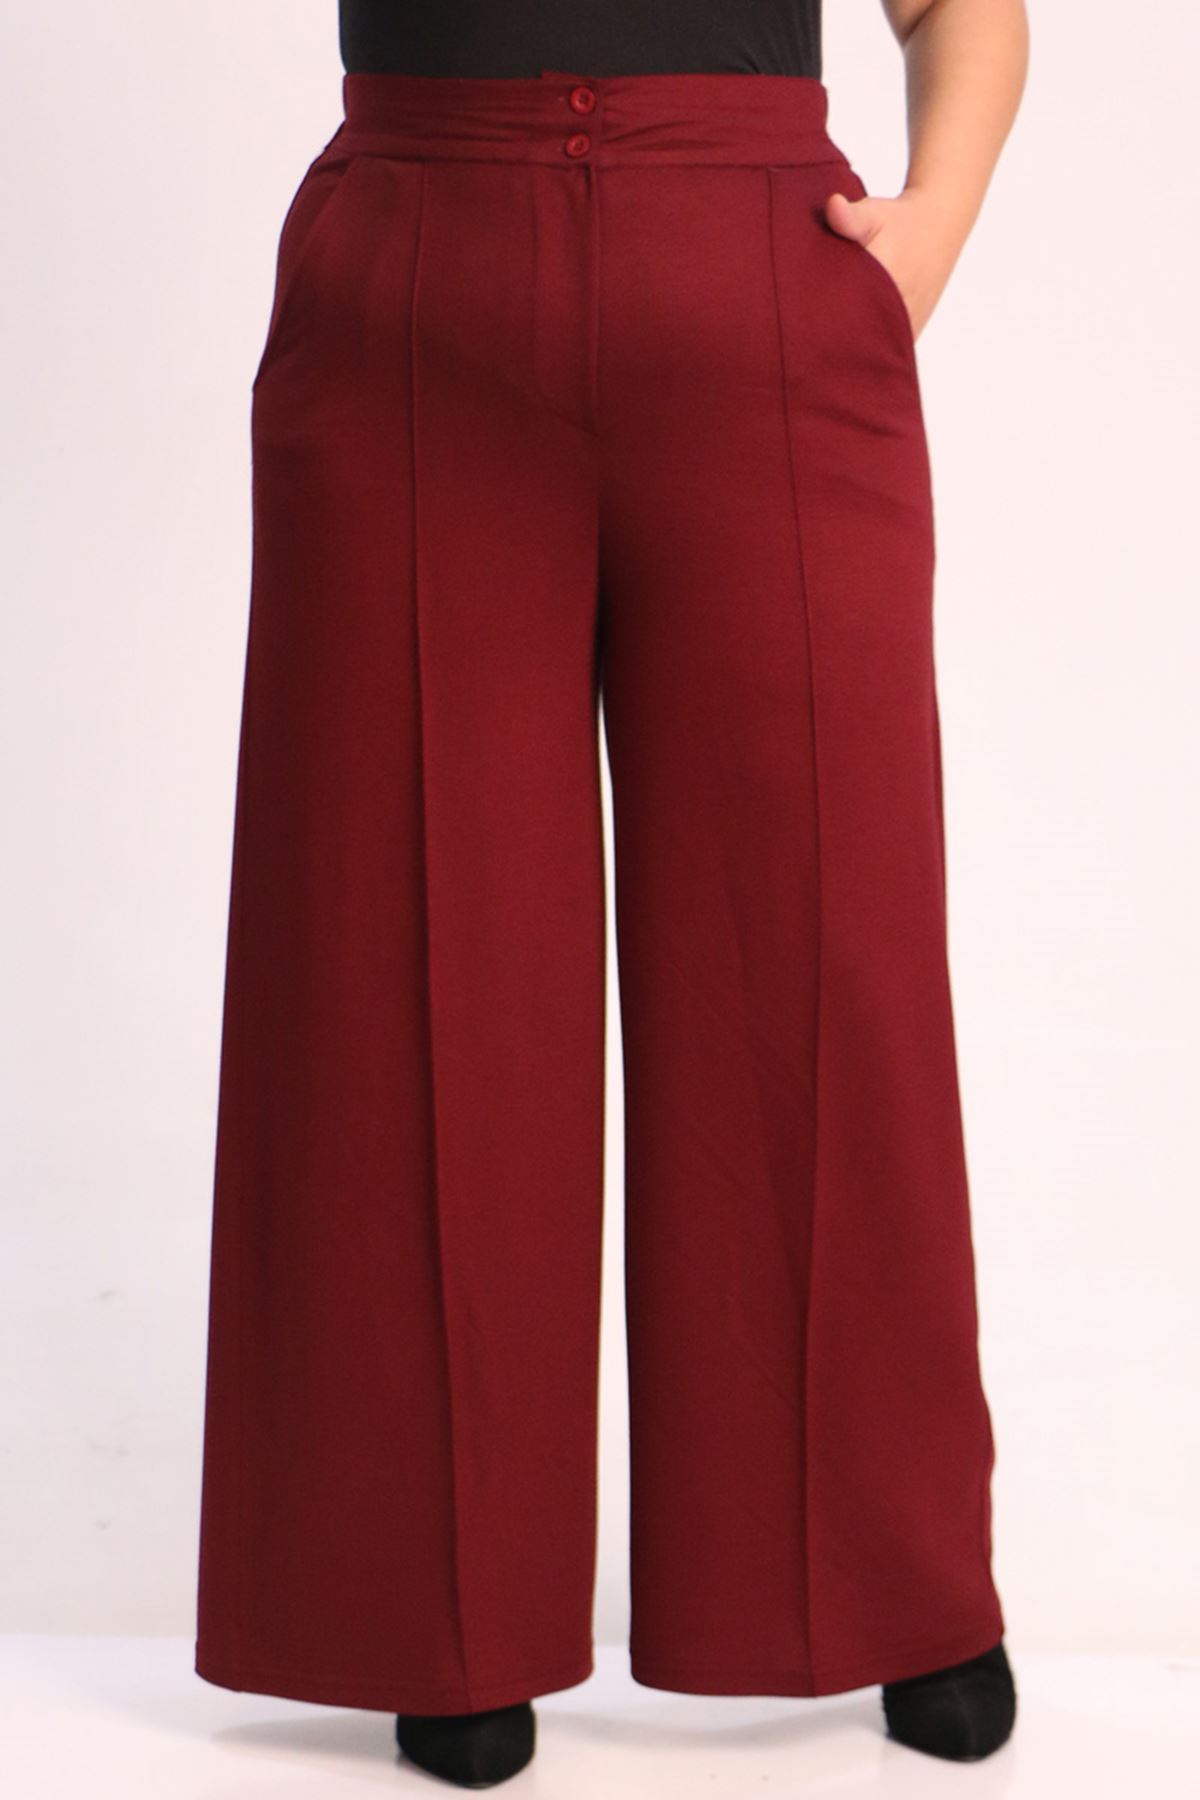 39502 Large Size Crystal Two Thread Trousers with Elastic Back - Burgundy